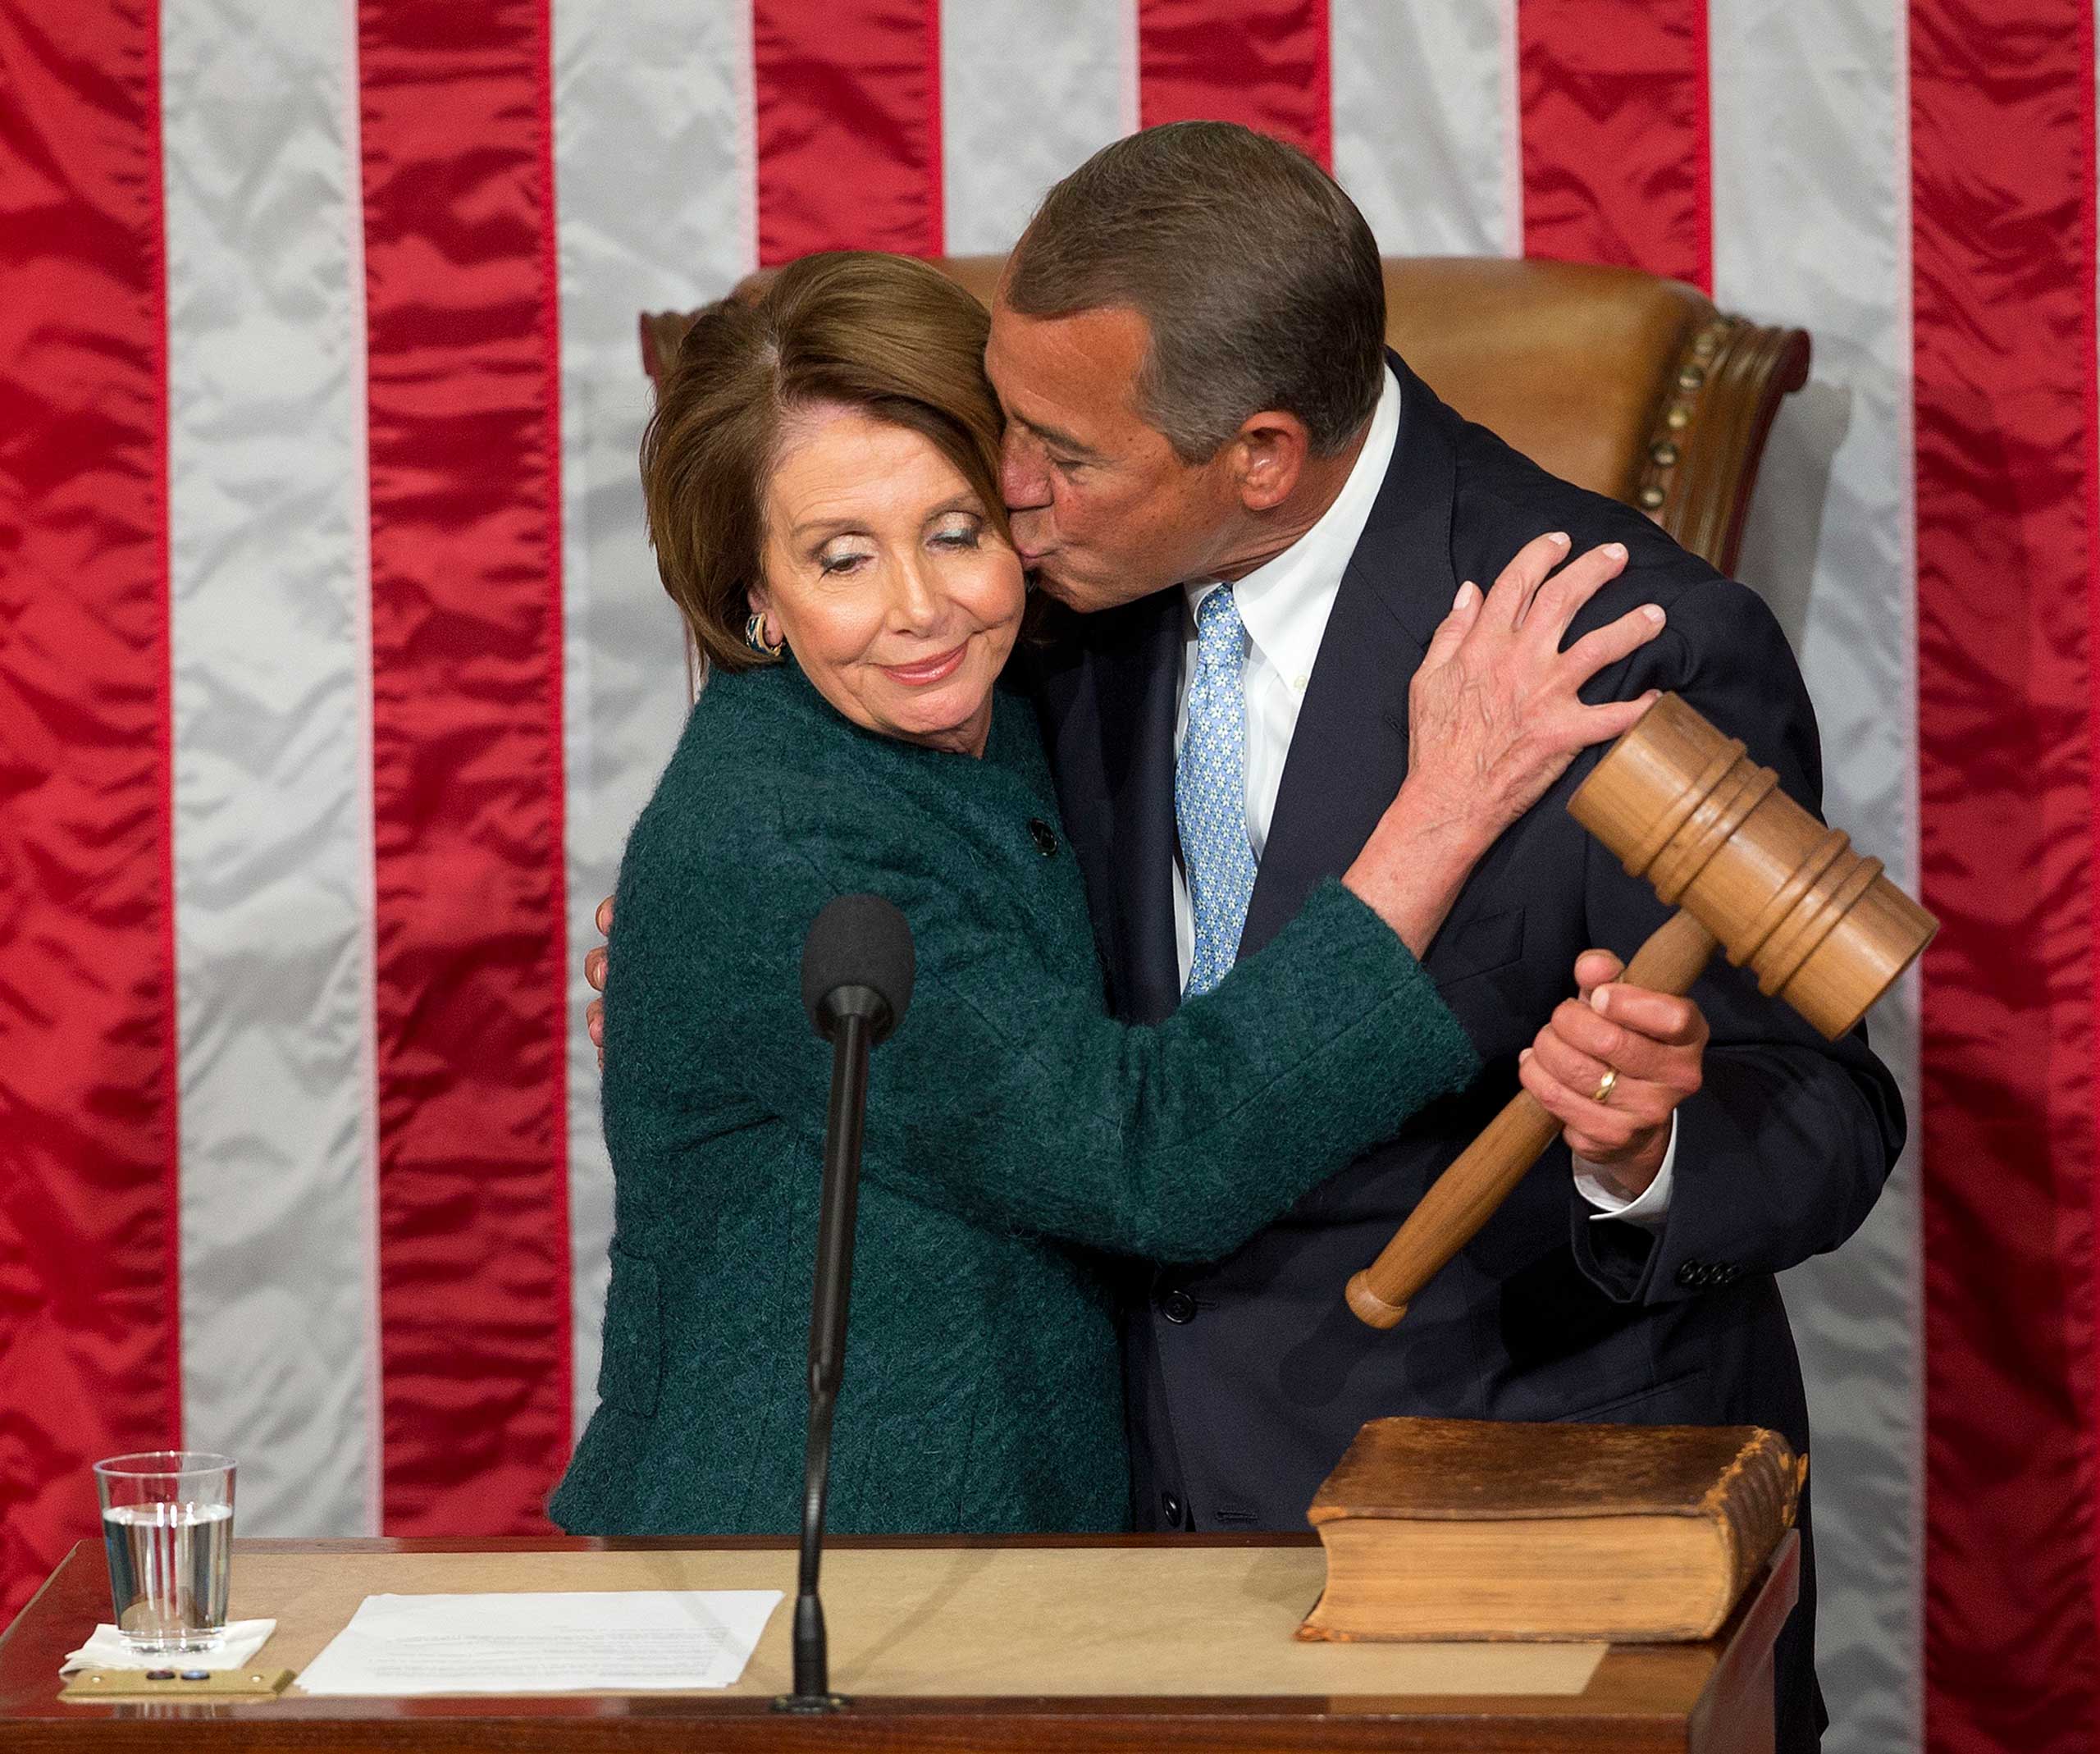 House Speaker John Boehner of Ohio, kisses House Minority Leader Nancy Pelosi of Calif. after being re-elected to a third term during the opening session of the 114th Congress on Capitol Hill in Washington on Jan. 6, 2015. (Pablo Martinez Monsivais—AP)